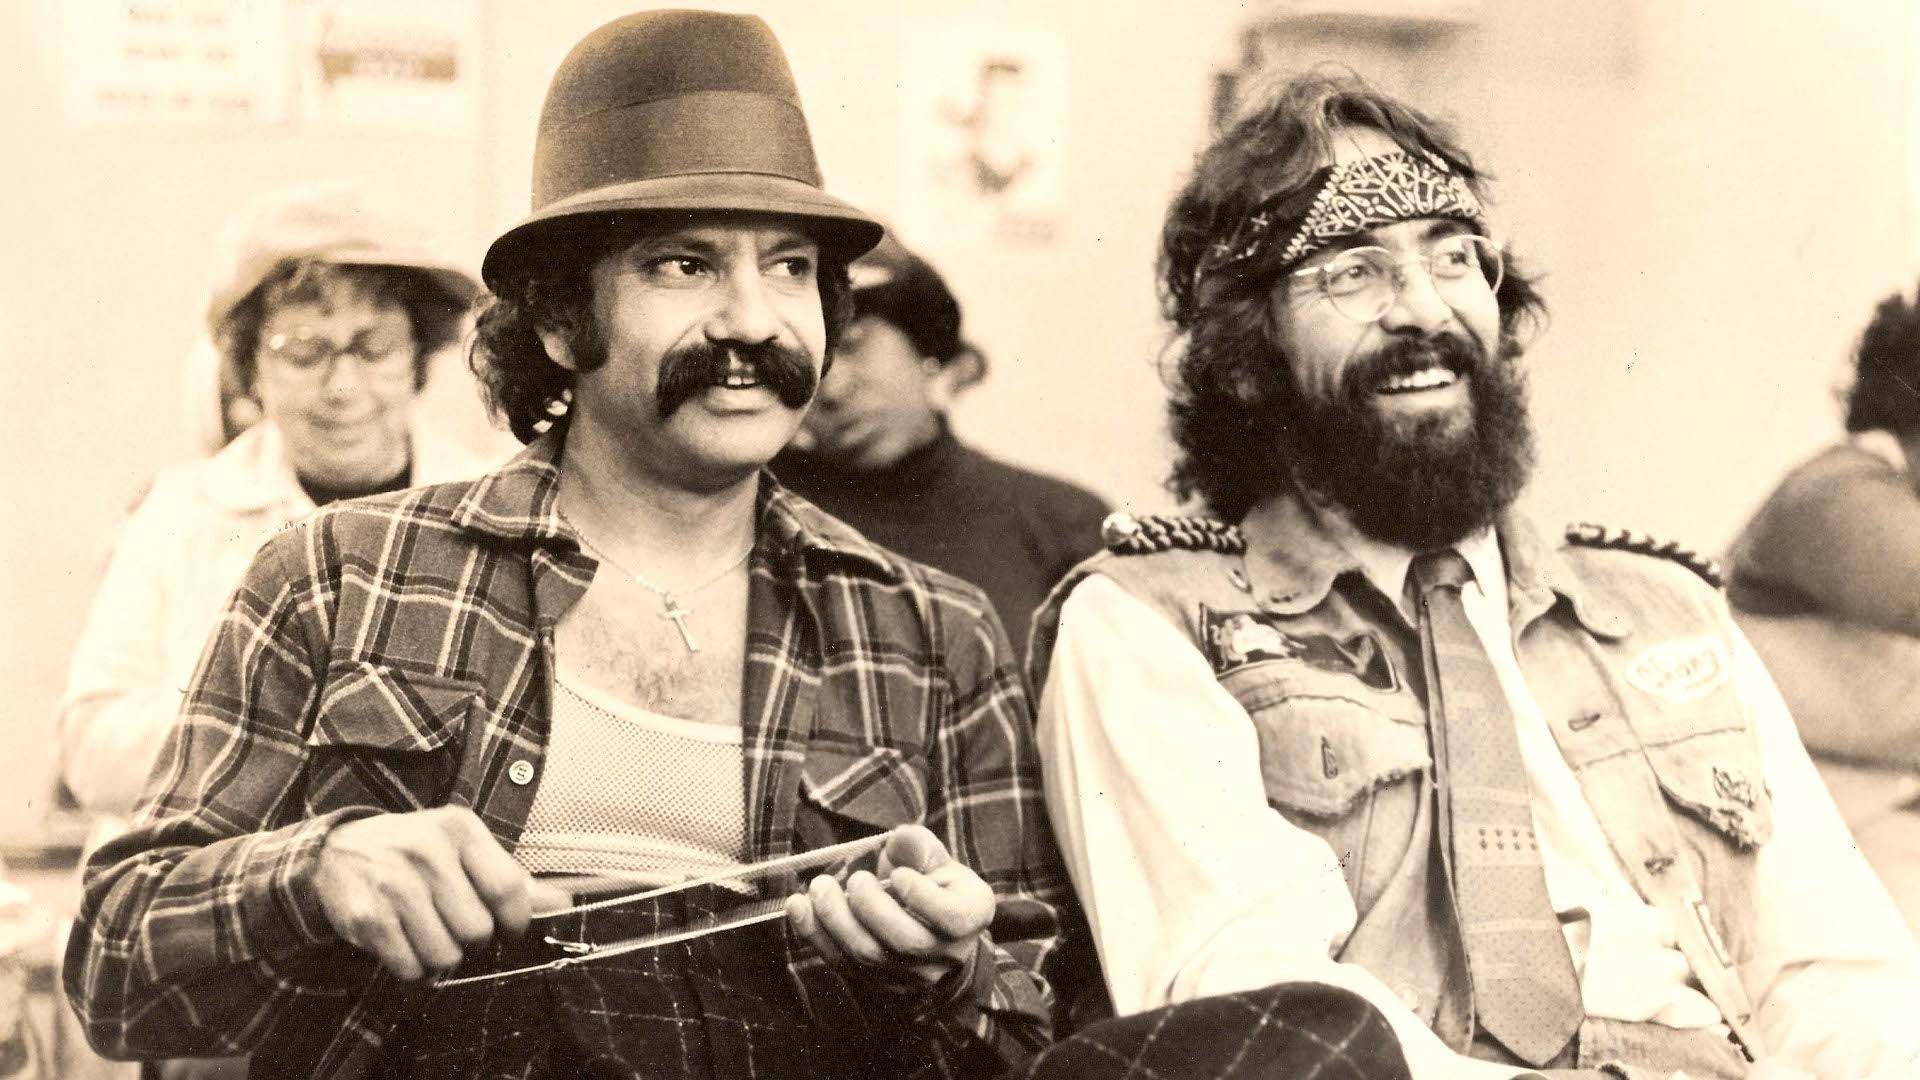 Young Cheech and Chong. Cheech and chong, Film history, Comedy duos